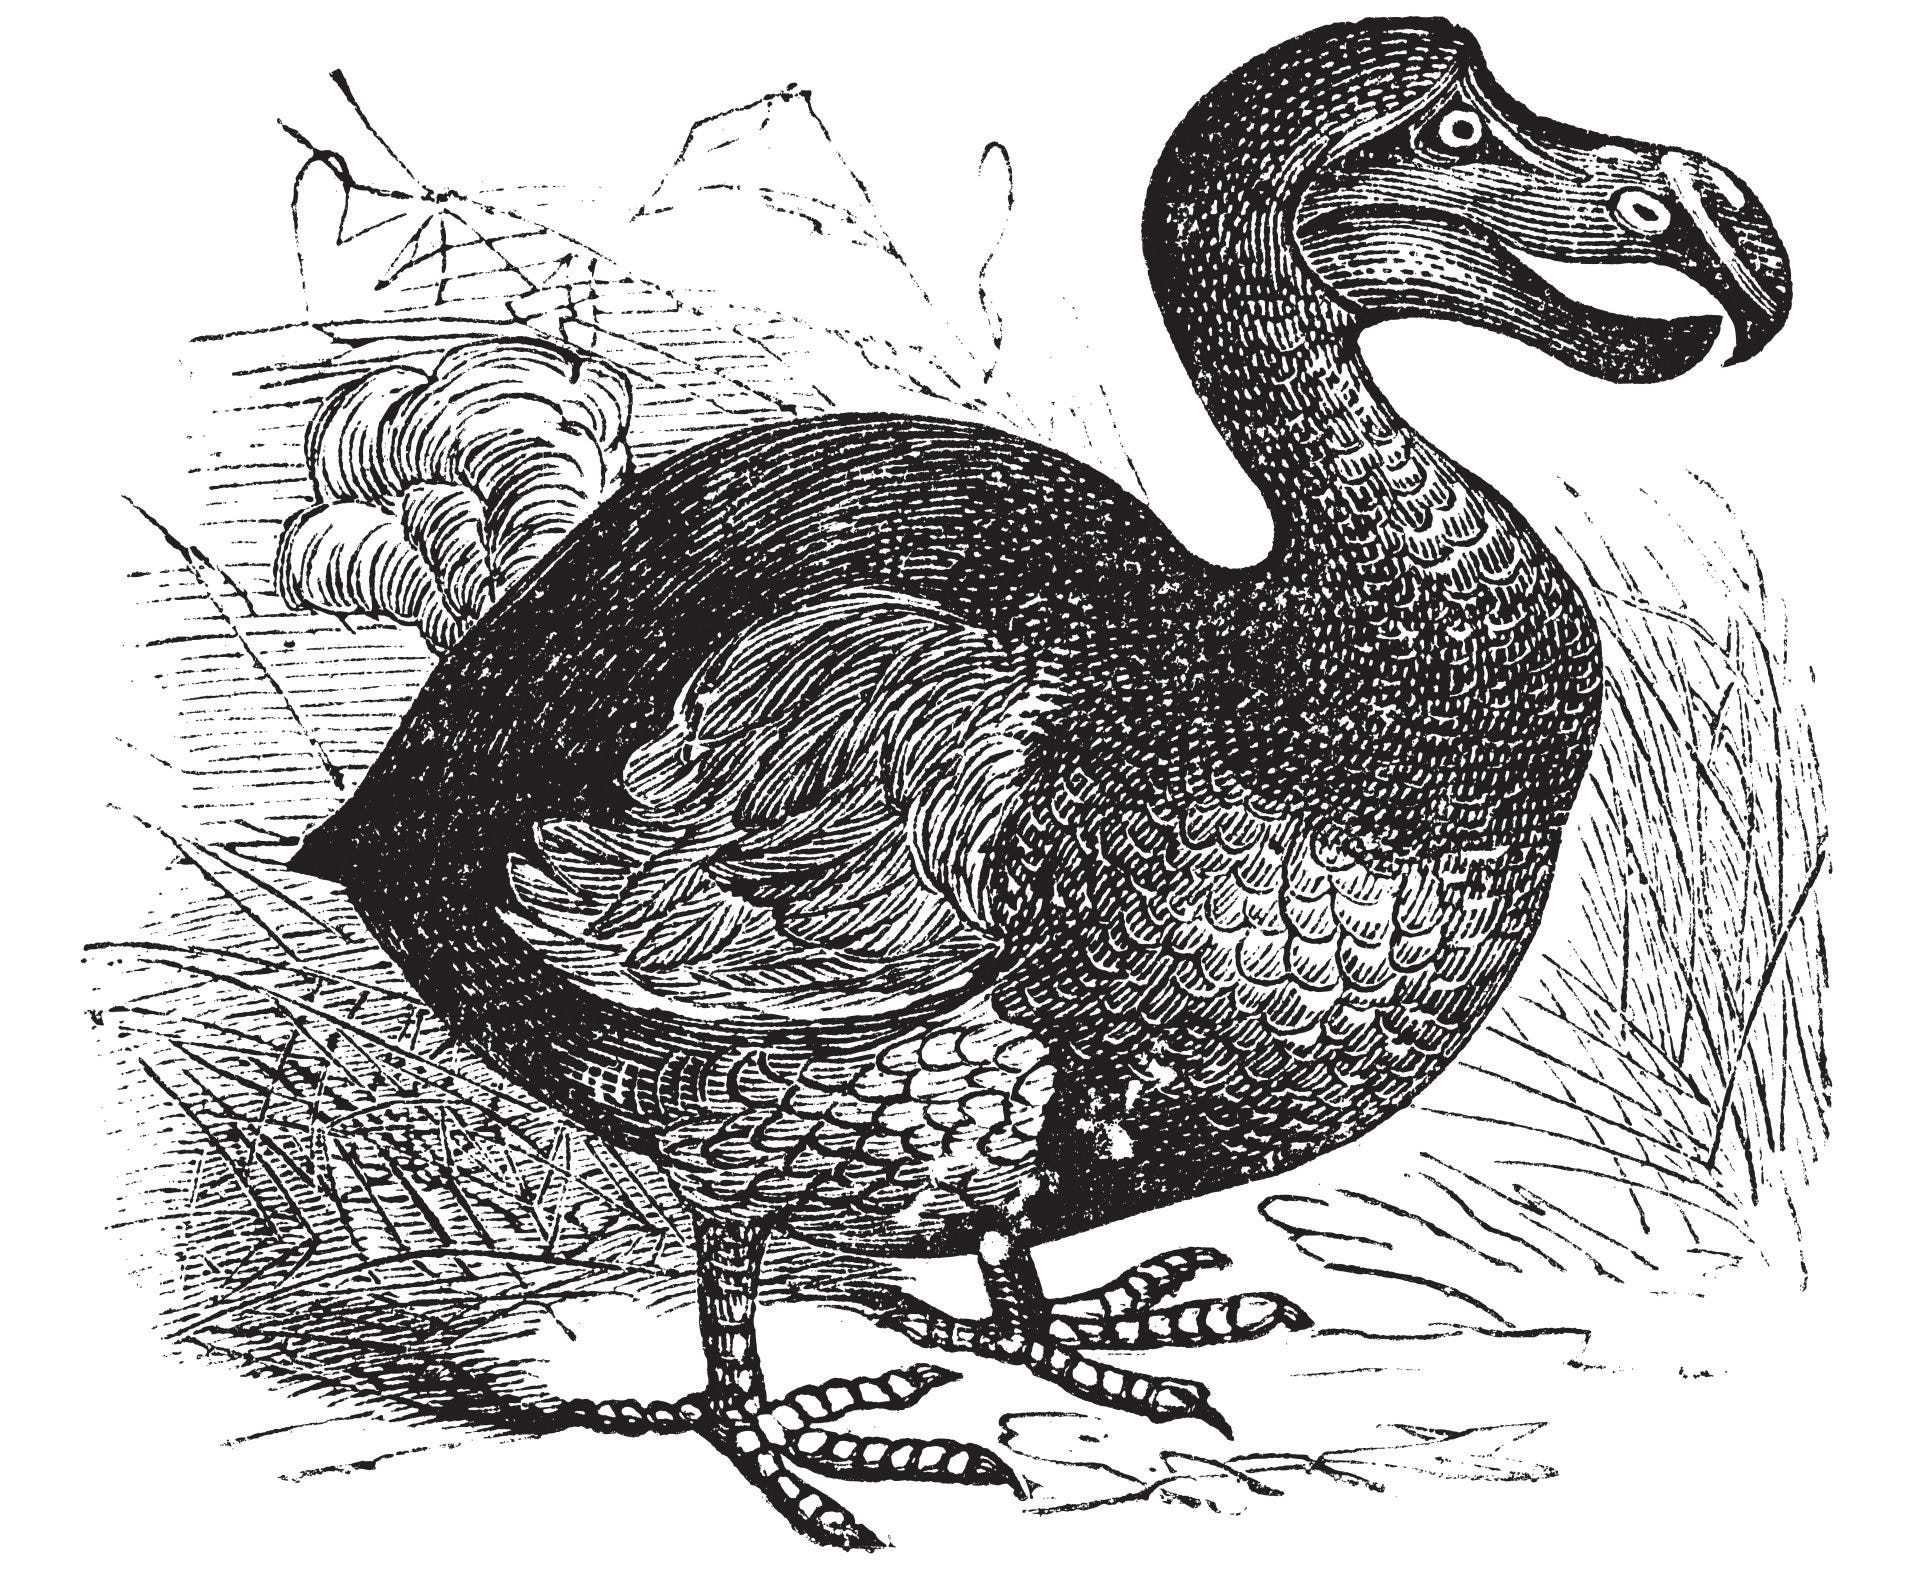 The Last Dodo and the Broader Implications | by Mark Farrar | Creatures ...